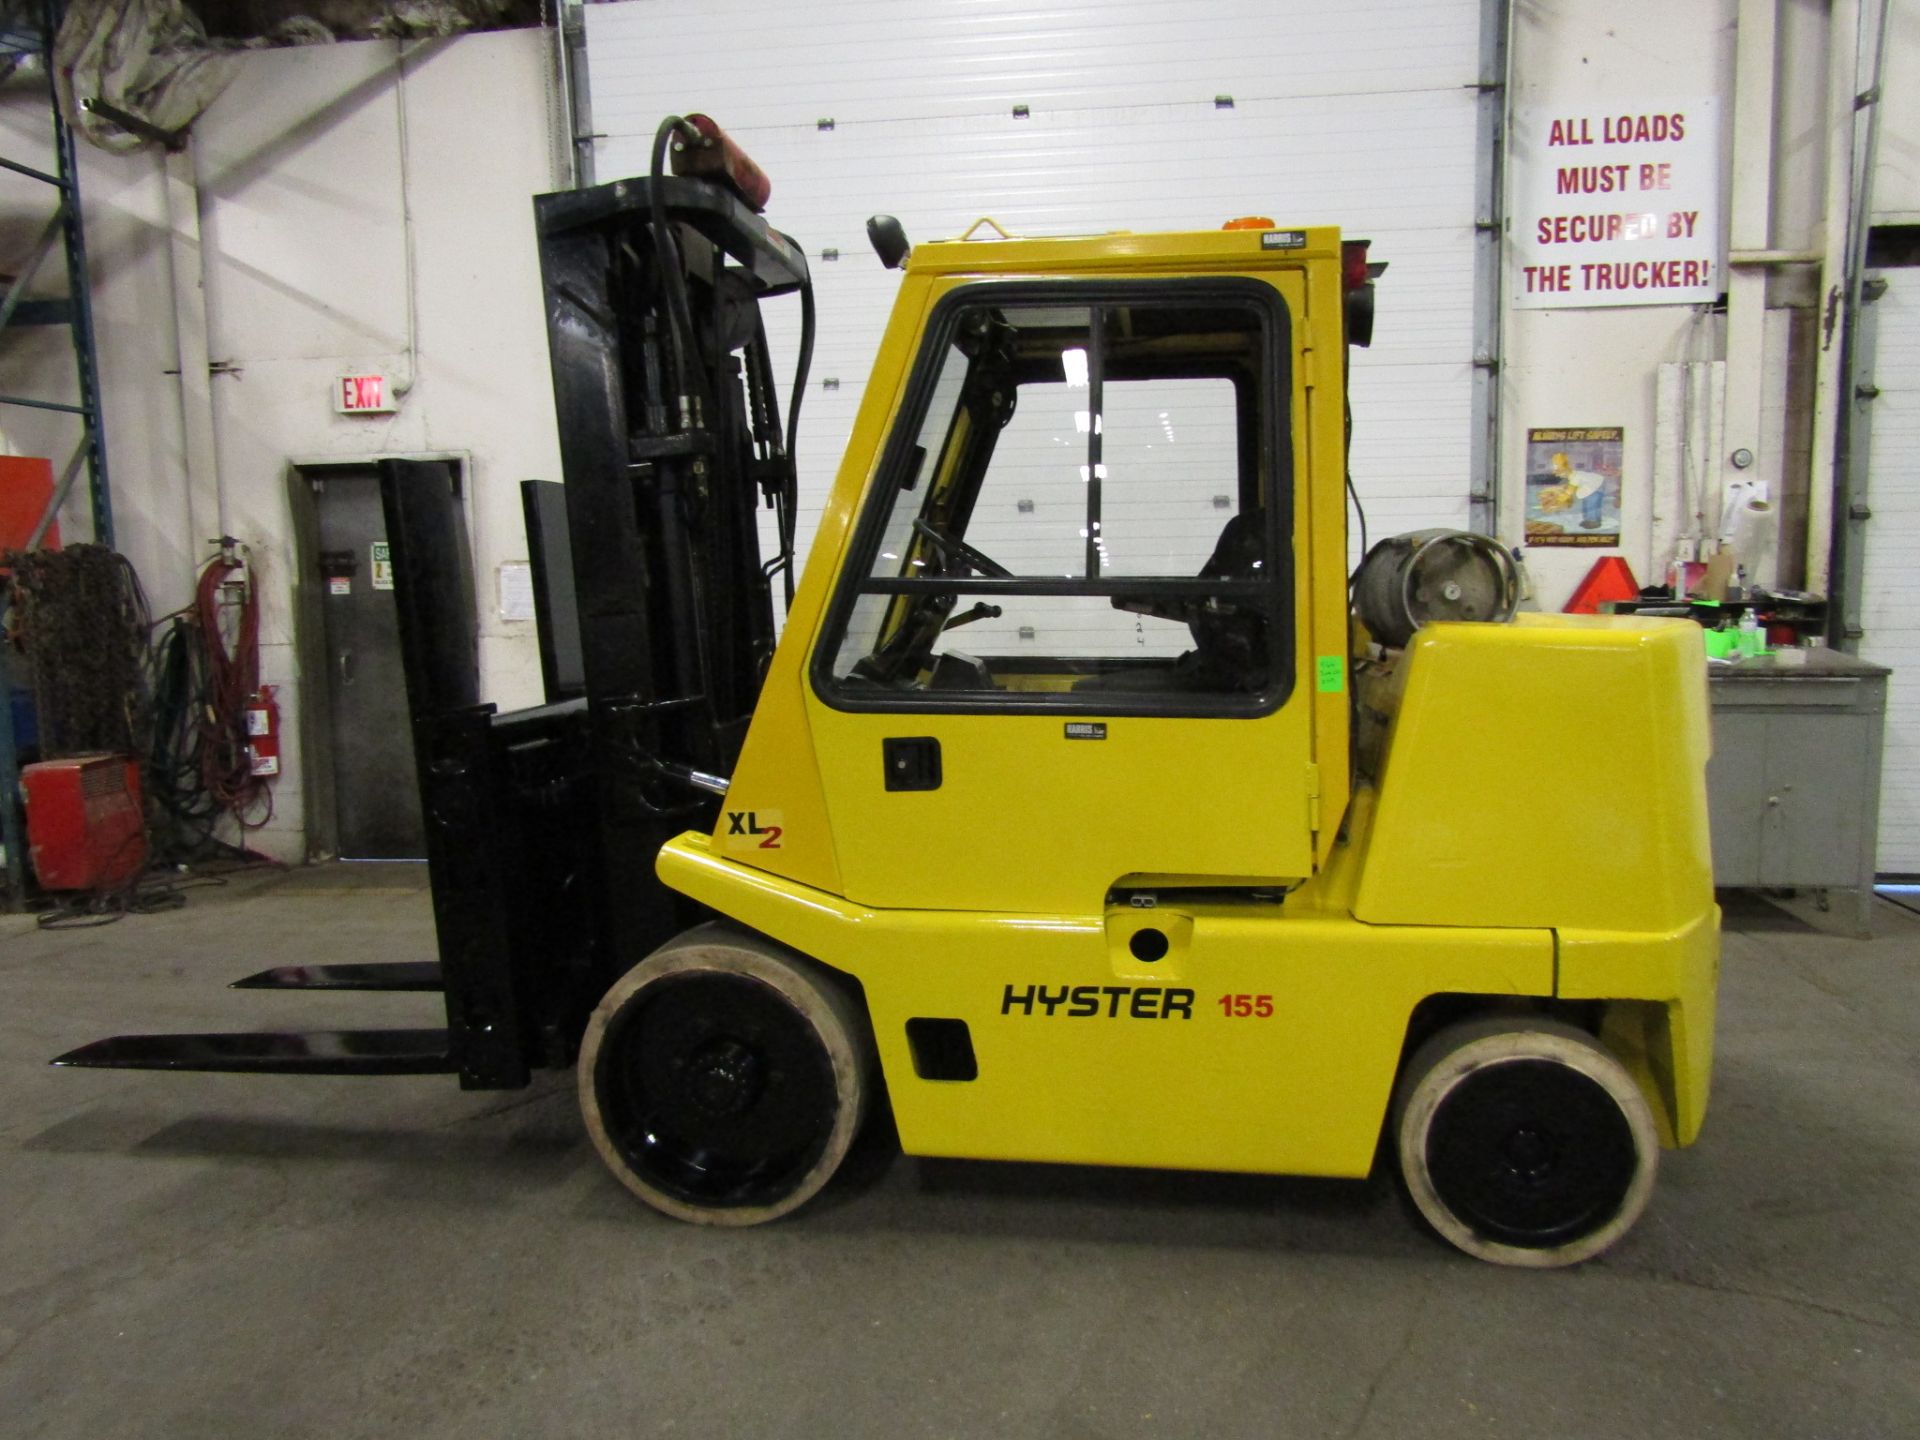 Hyster 15500lbs Capacity Forklift HEATED CAB with 3-stage mast and sideshift - LPG (propane)